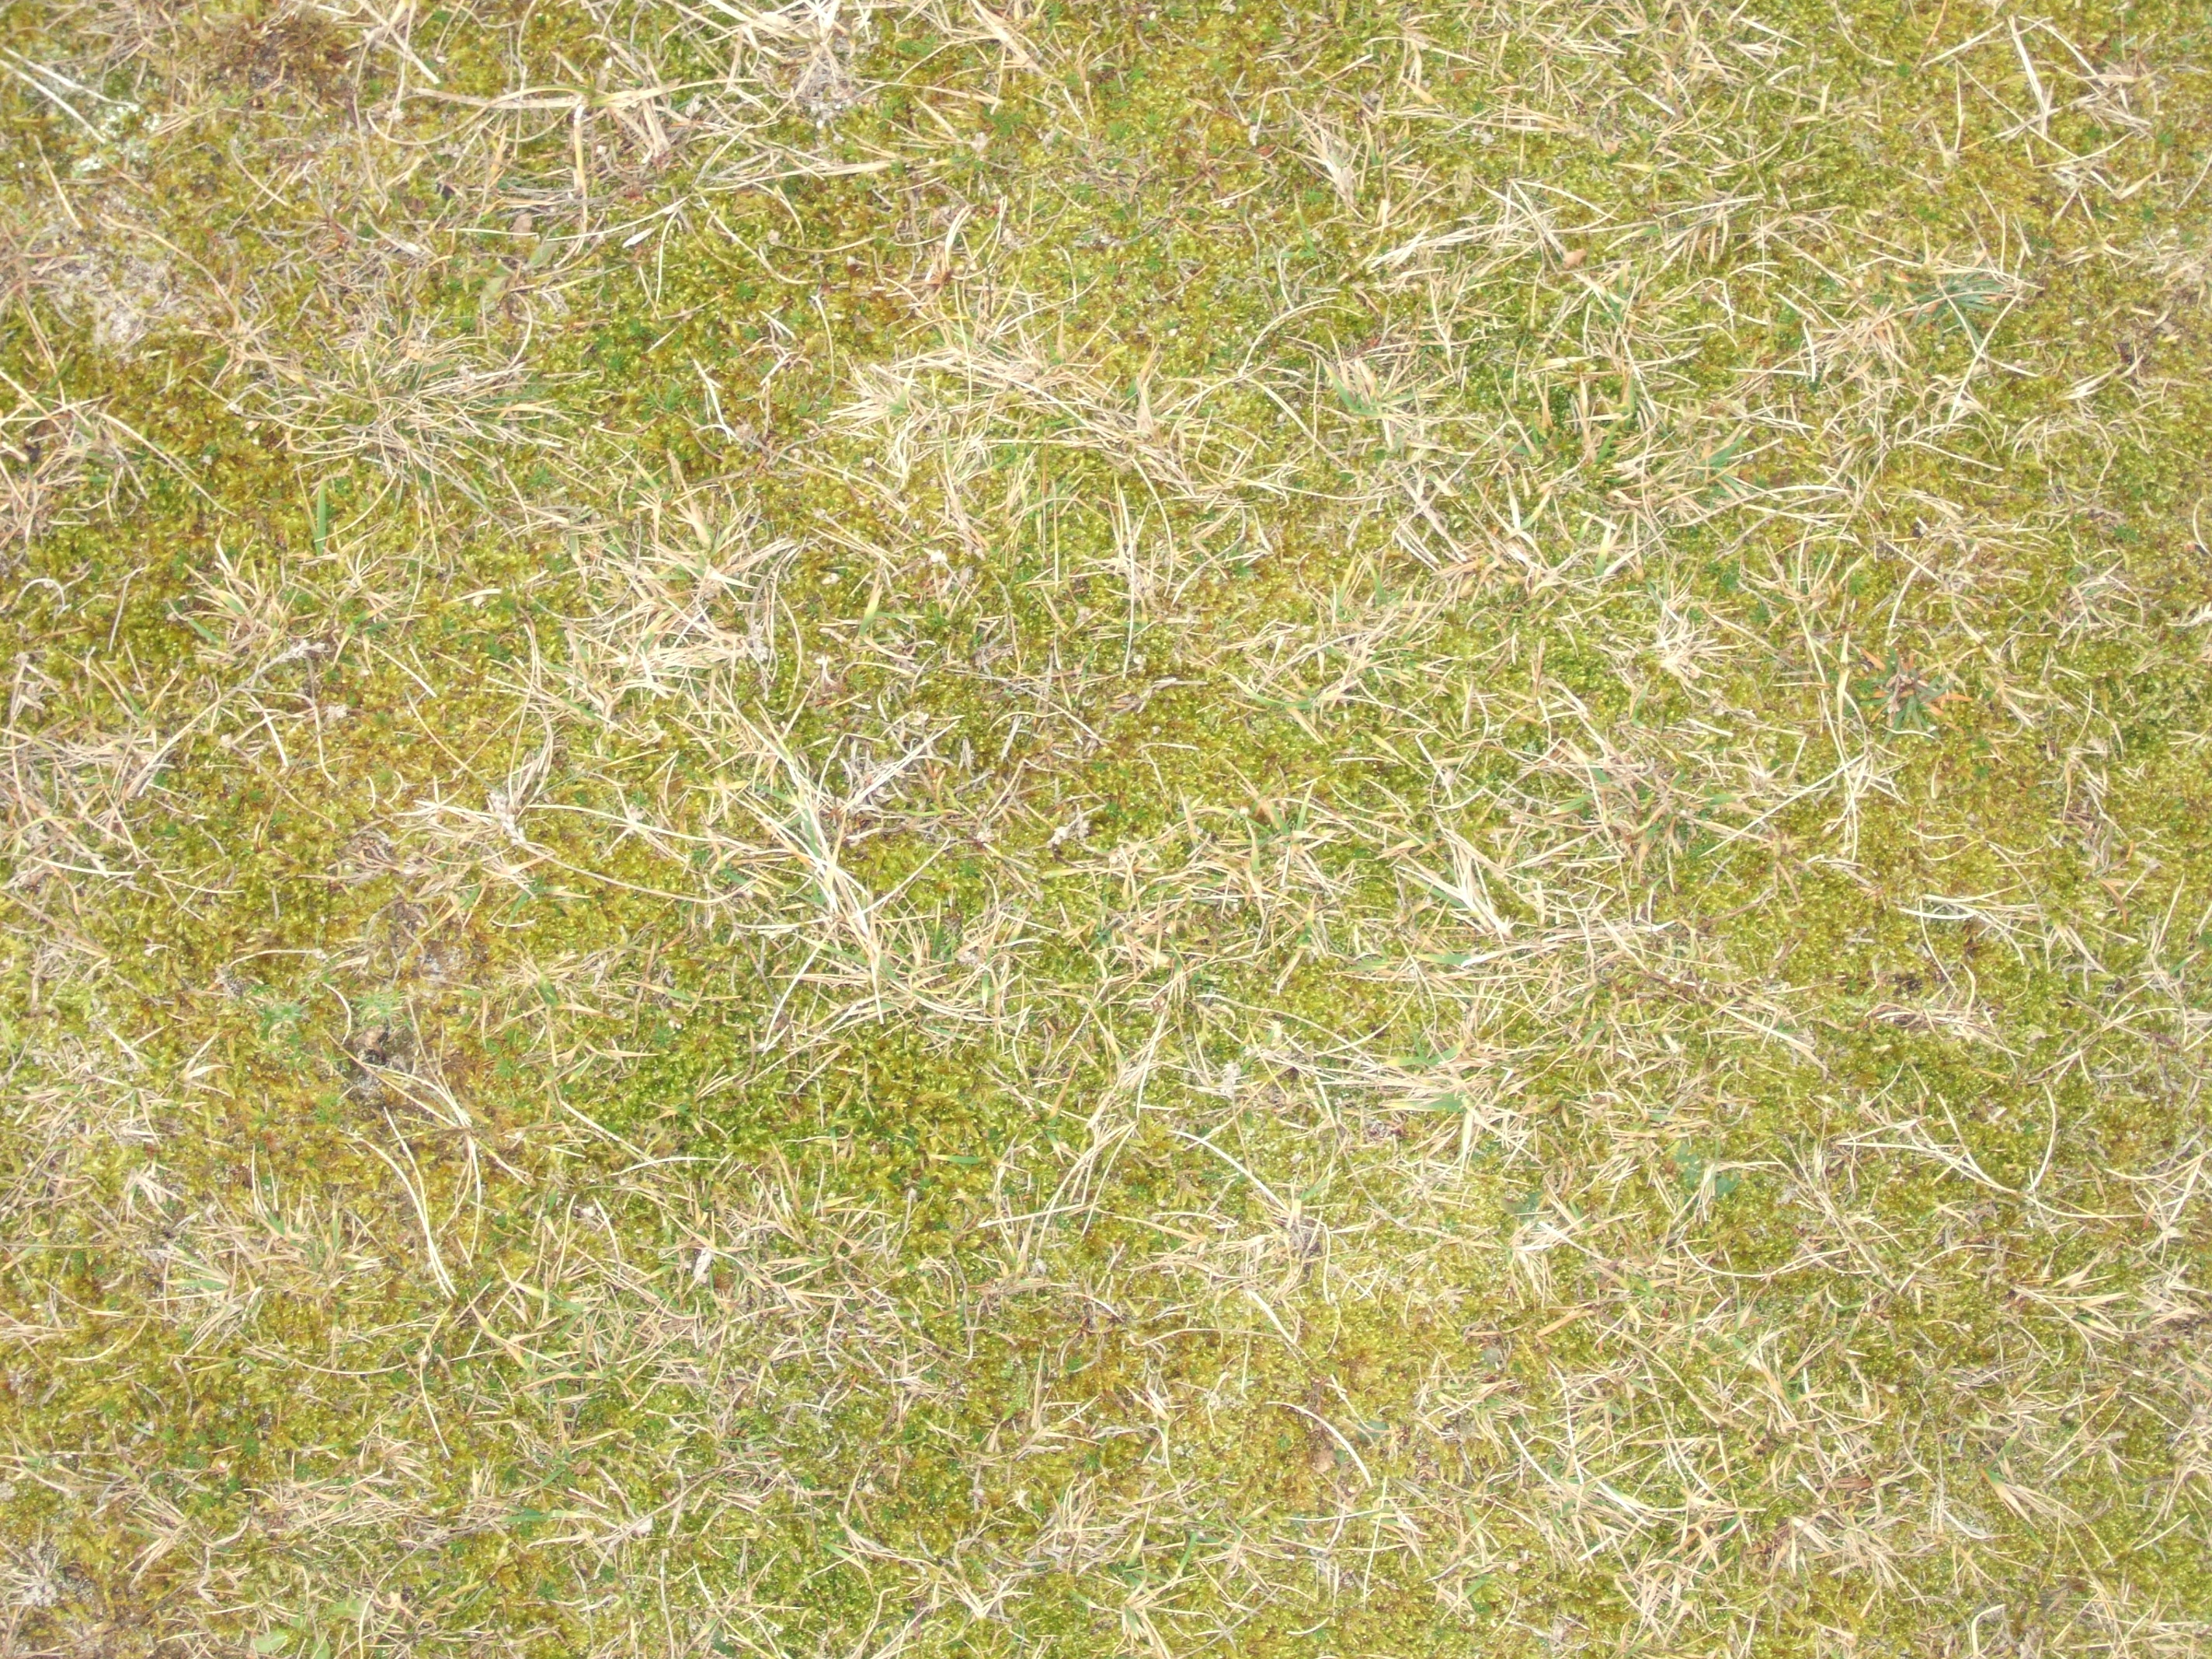 Image*After : textures : tabus grass texture grounds pineneedles needles